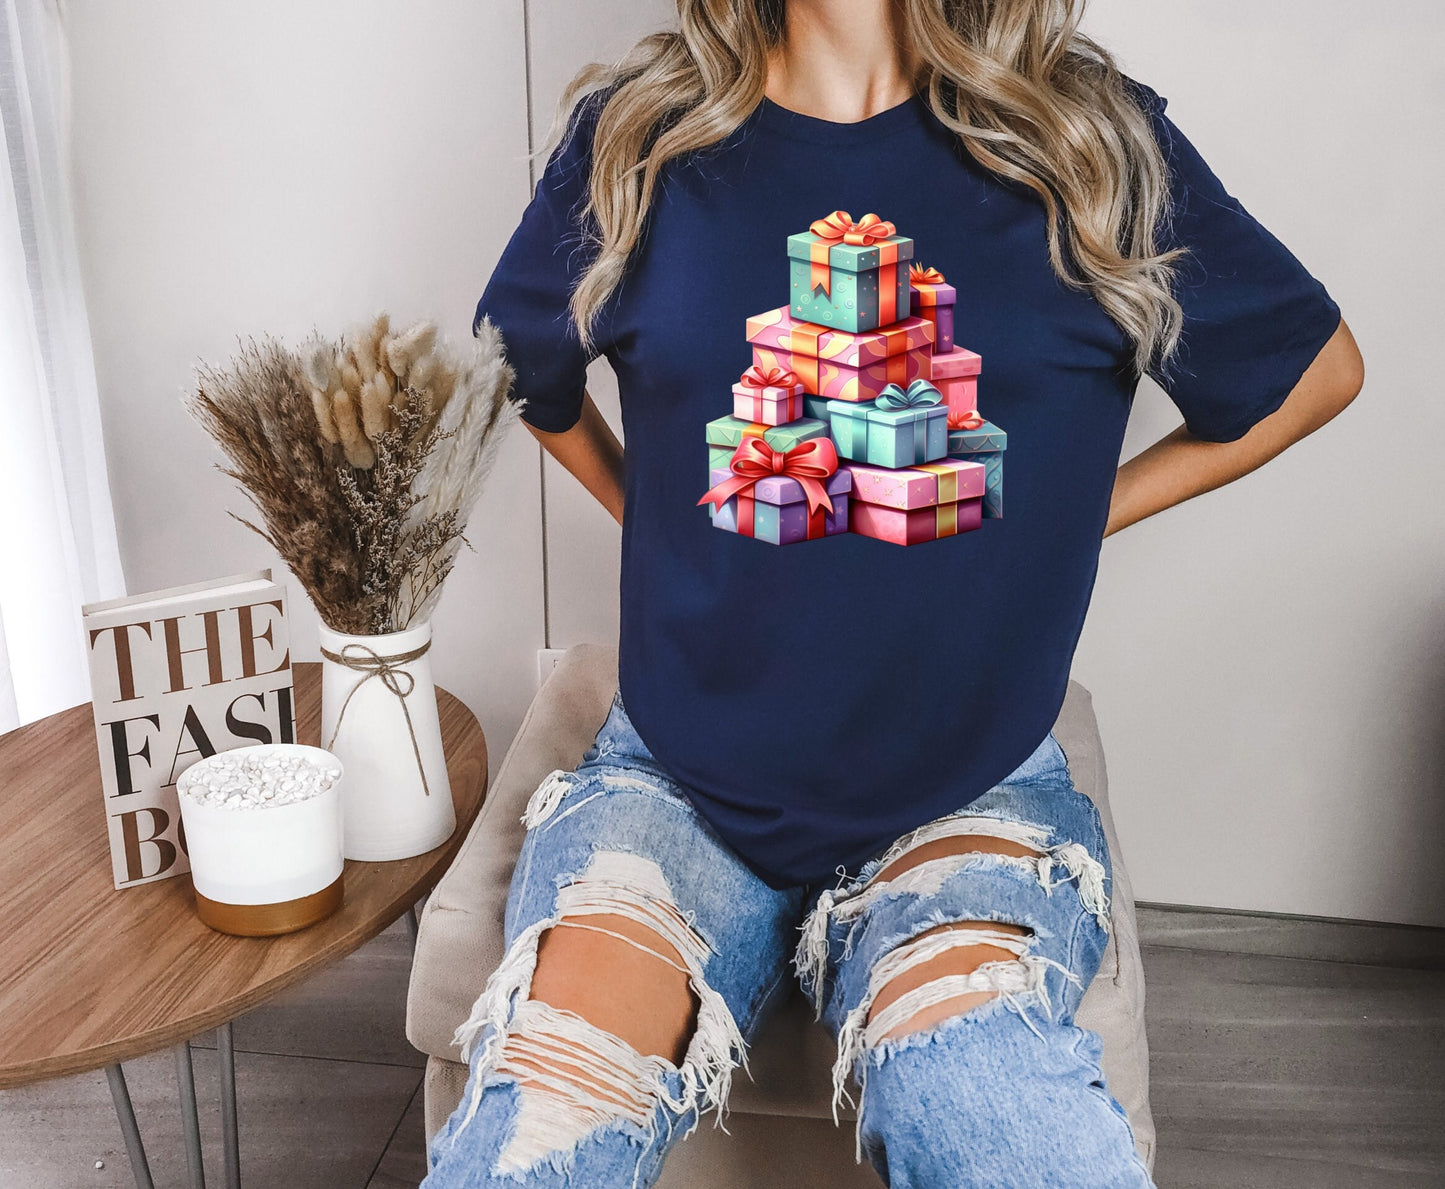 The Tower of Presents Christmas Shirt Makes the Perfect Gift for Friends, Family, Coworkers or yourself.  Check Out My Shop for even more Great Designs. www.scorpiontees.etsy.com